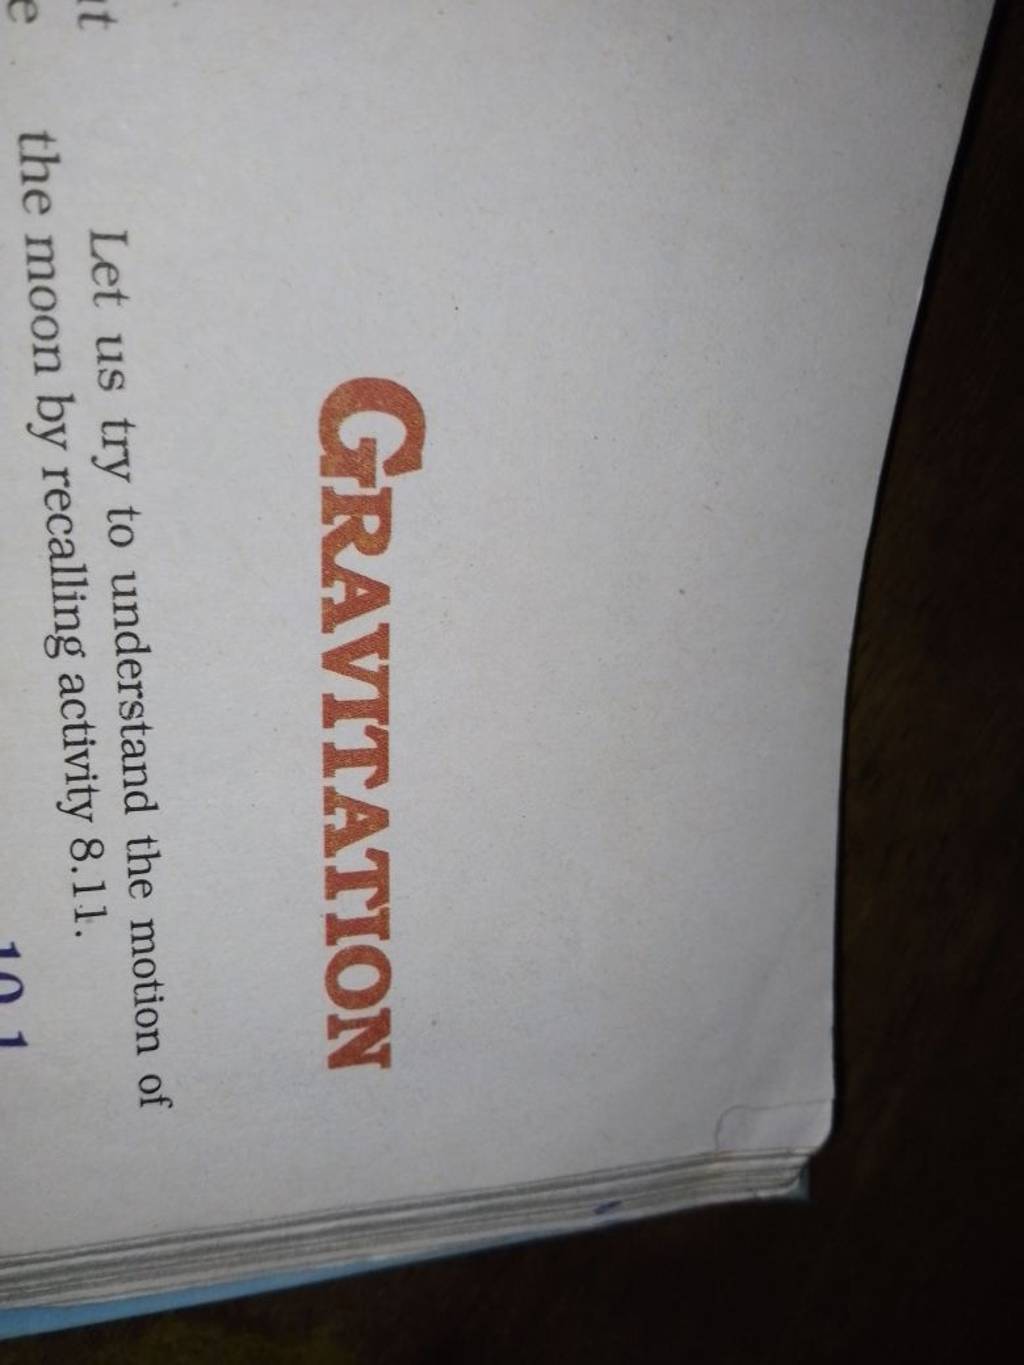 Graviation
Let us try to understand the motion
the moon by recalling a